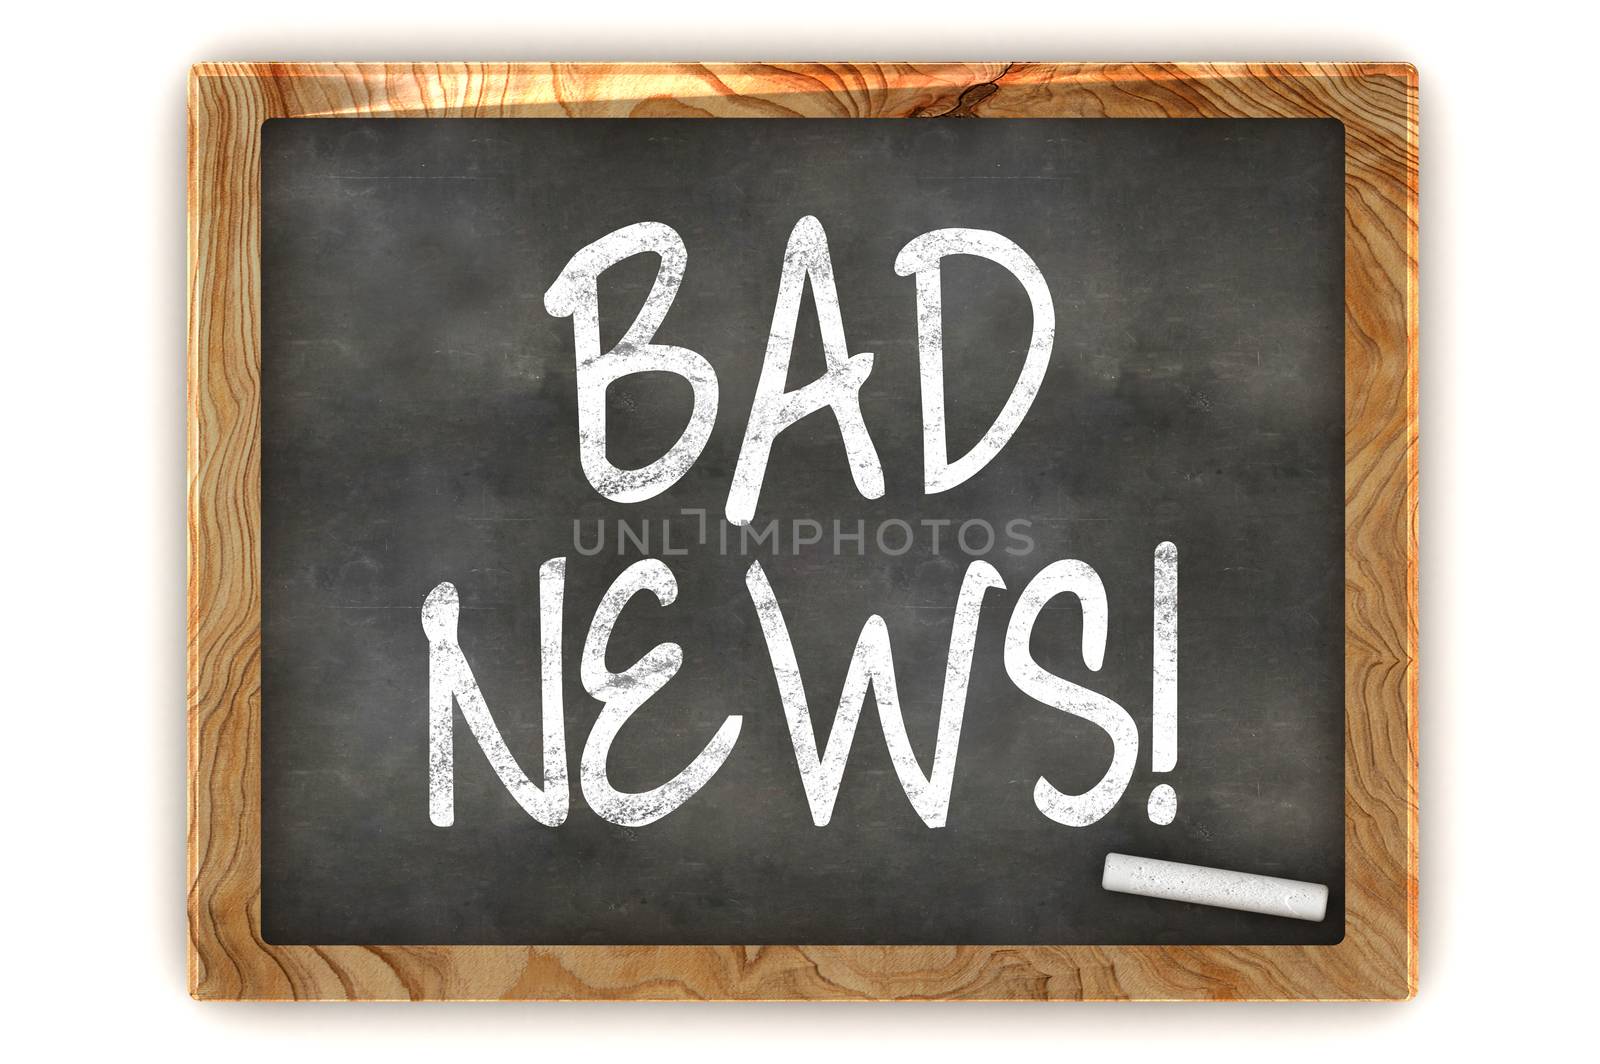 A Colourful 3d Rendered Concept Illustration showing "BAD NEWS" writen on a Blackboard with white chalk